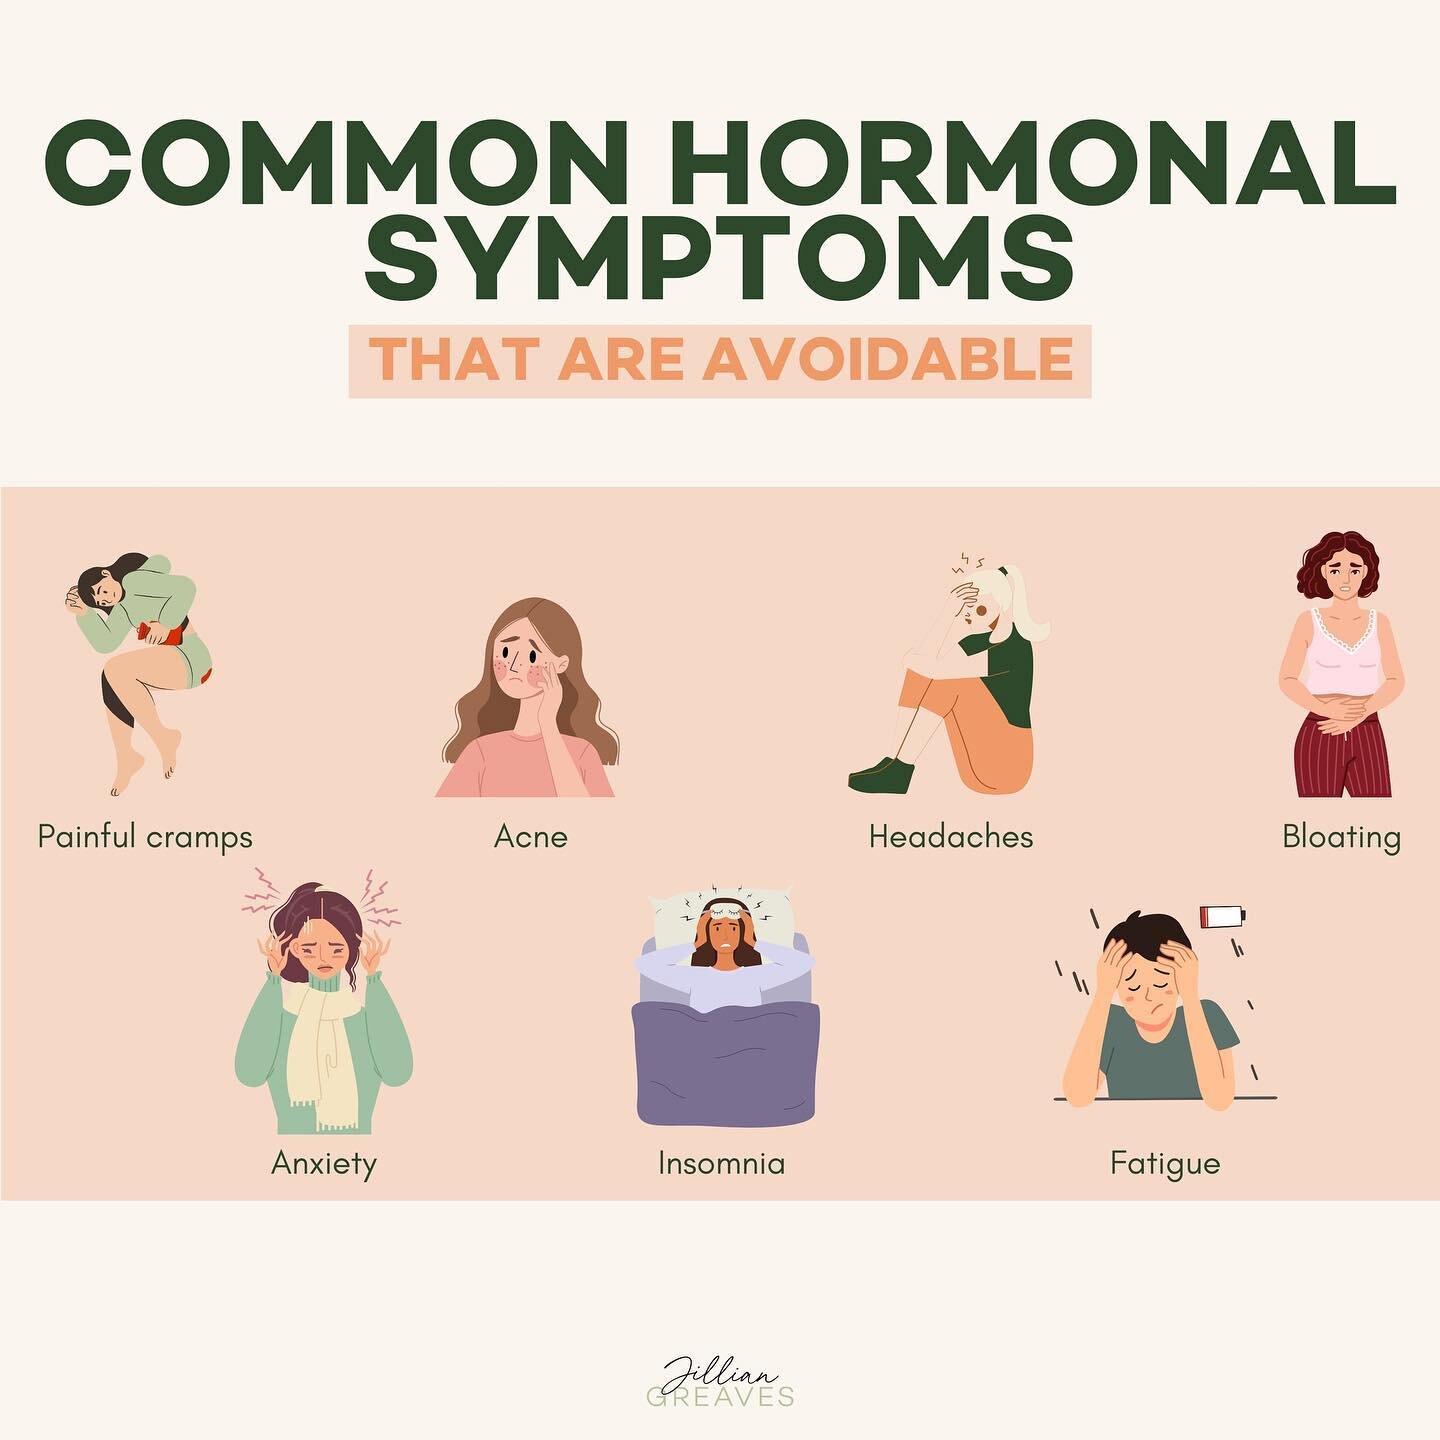 Raise your hand if you've ever thought (or have been told) that experiencing unpleasant period related symptoms was normal or &quot;part of being a woman&quot; 🙋🏽&zwj;♀️.

Now raise your hand if you&rsquo;ve sought out help for any of these issues 